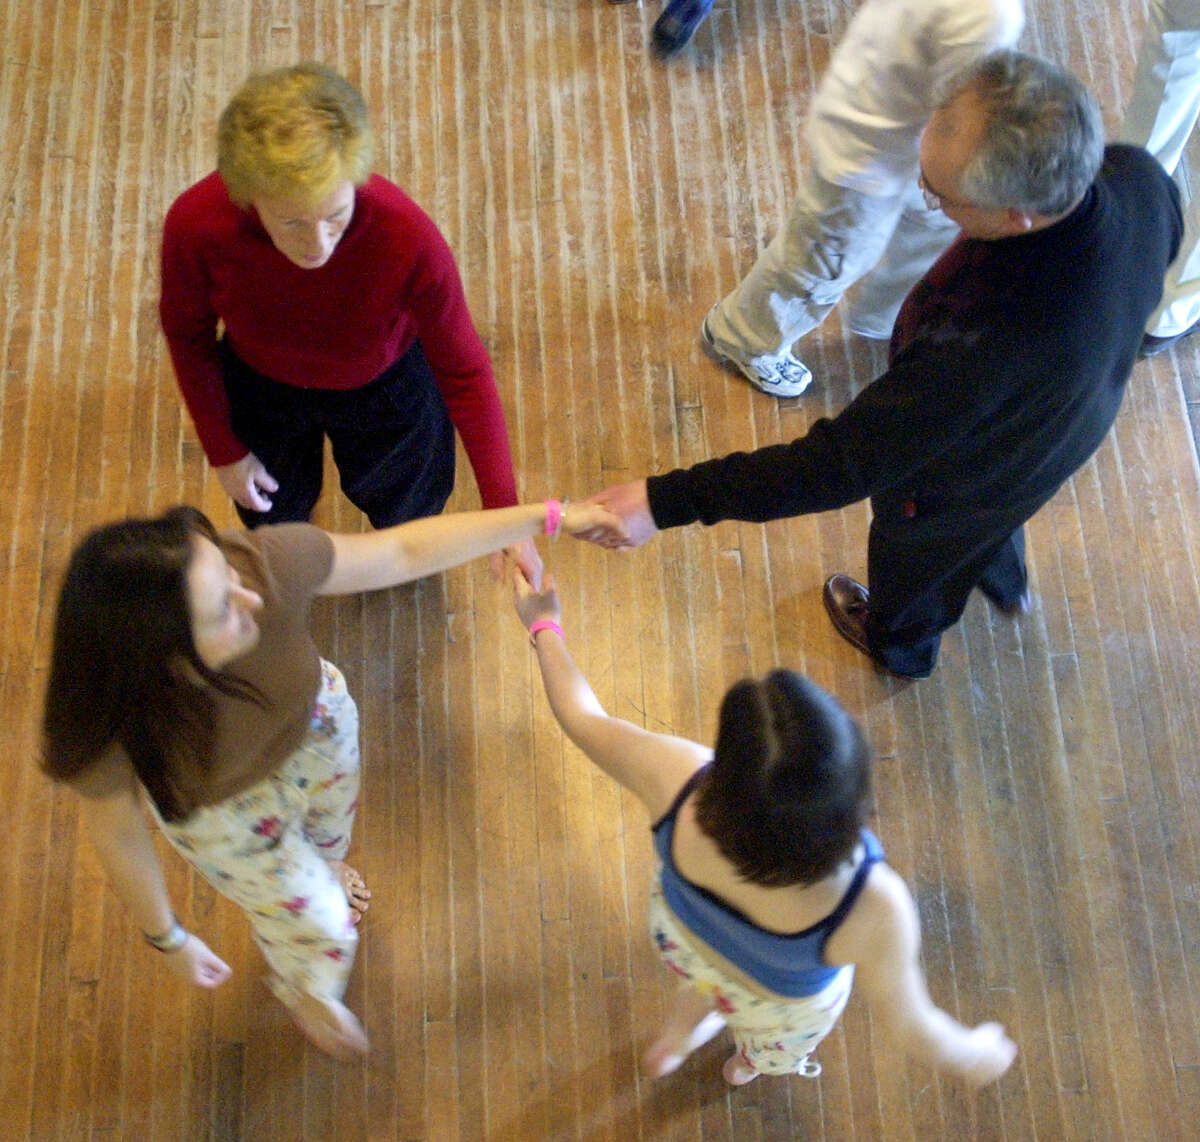 TIMES UNION STAFF PHOTO WILL WALDRON--Dance Flurry, dancers cross hands during a work shop entitled Contras for novices, at the Saratoga Music Hall, Saturday, February 14, 2004.